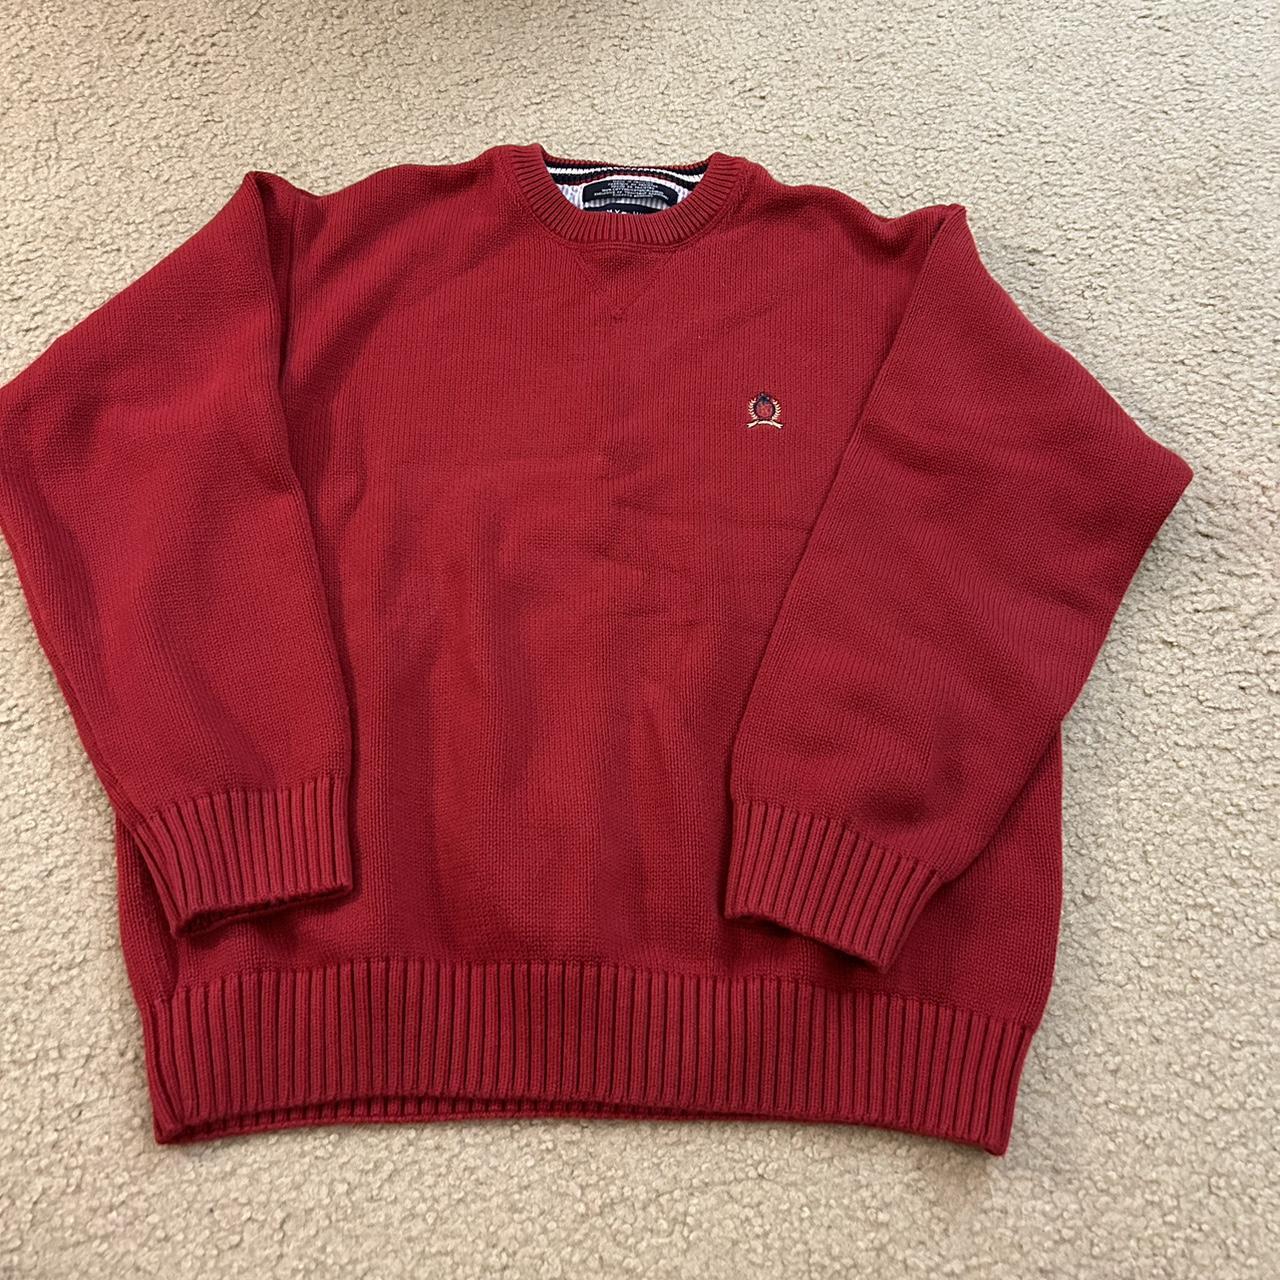 XL Tommy Hilfiger red sweater 🍷 no stains or holes - Depop